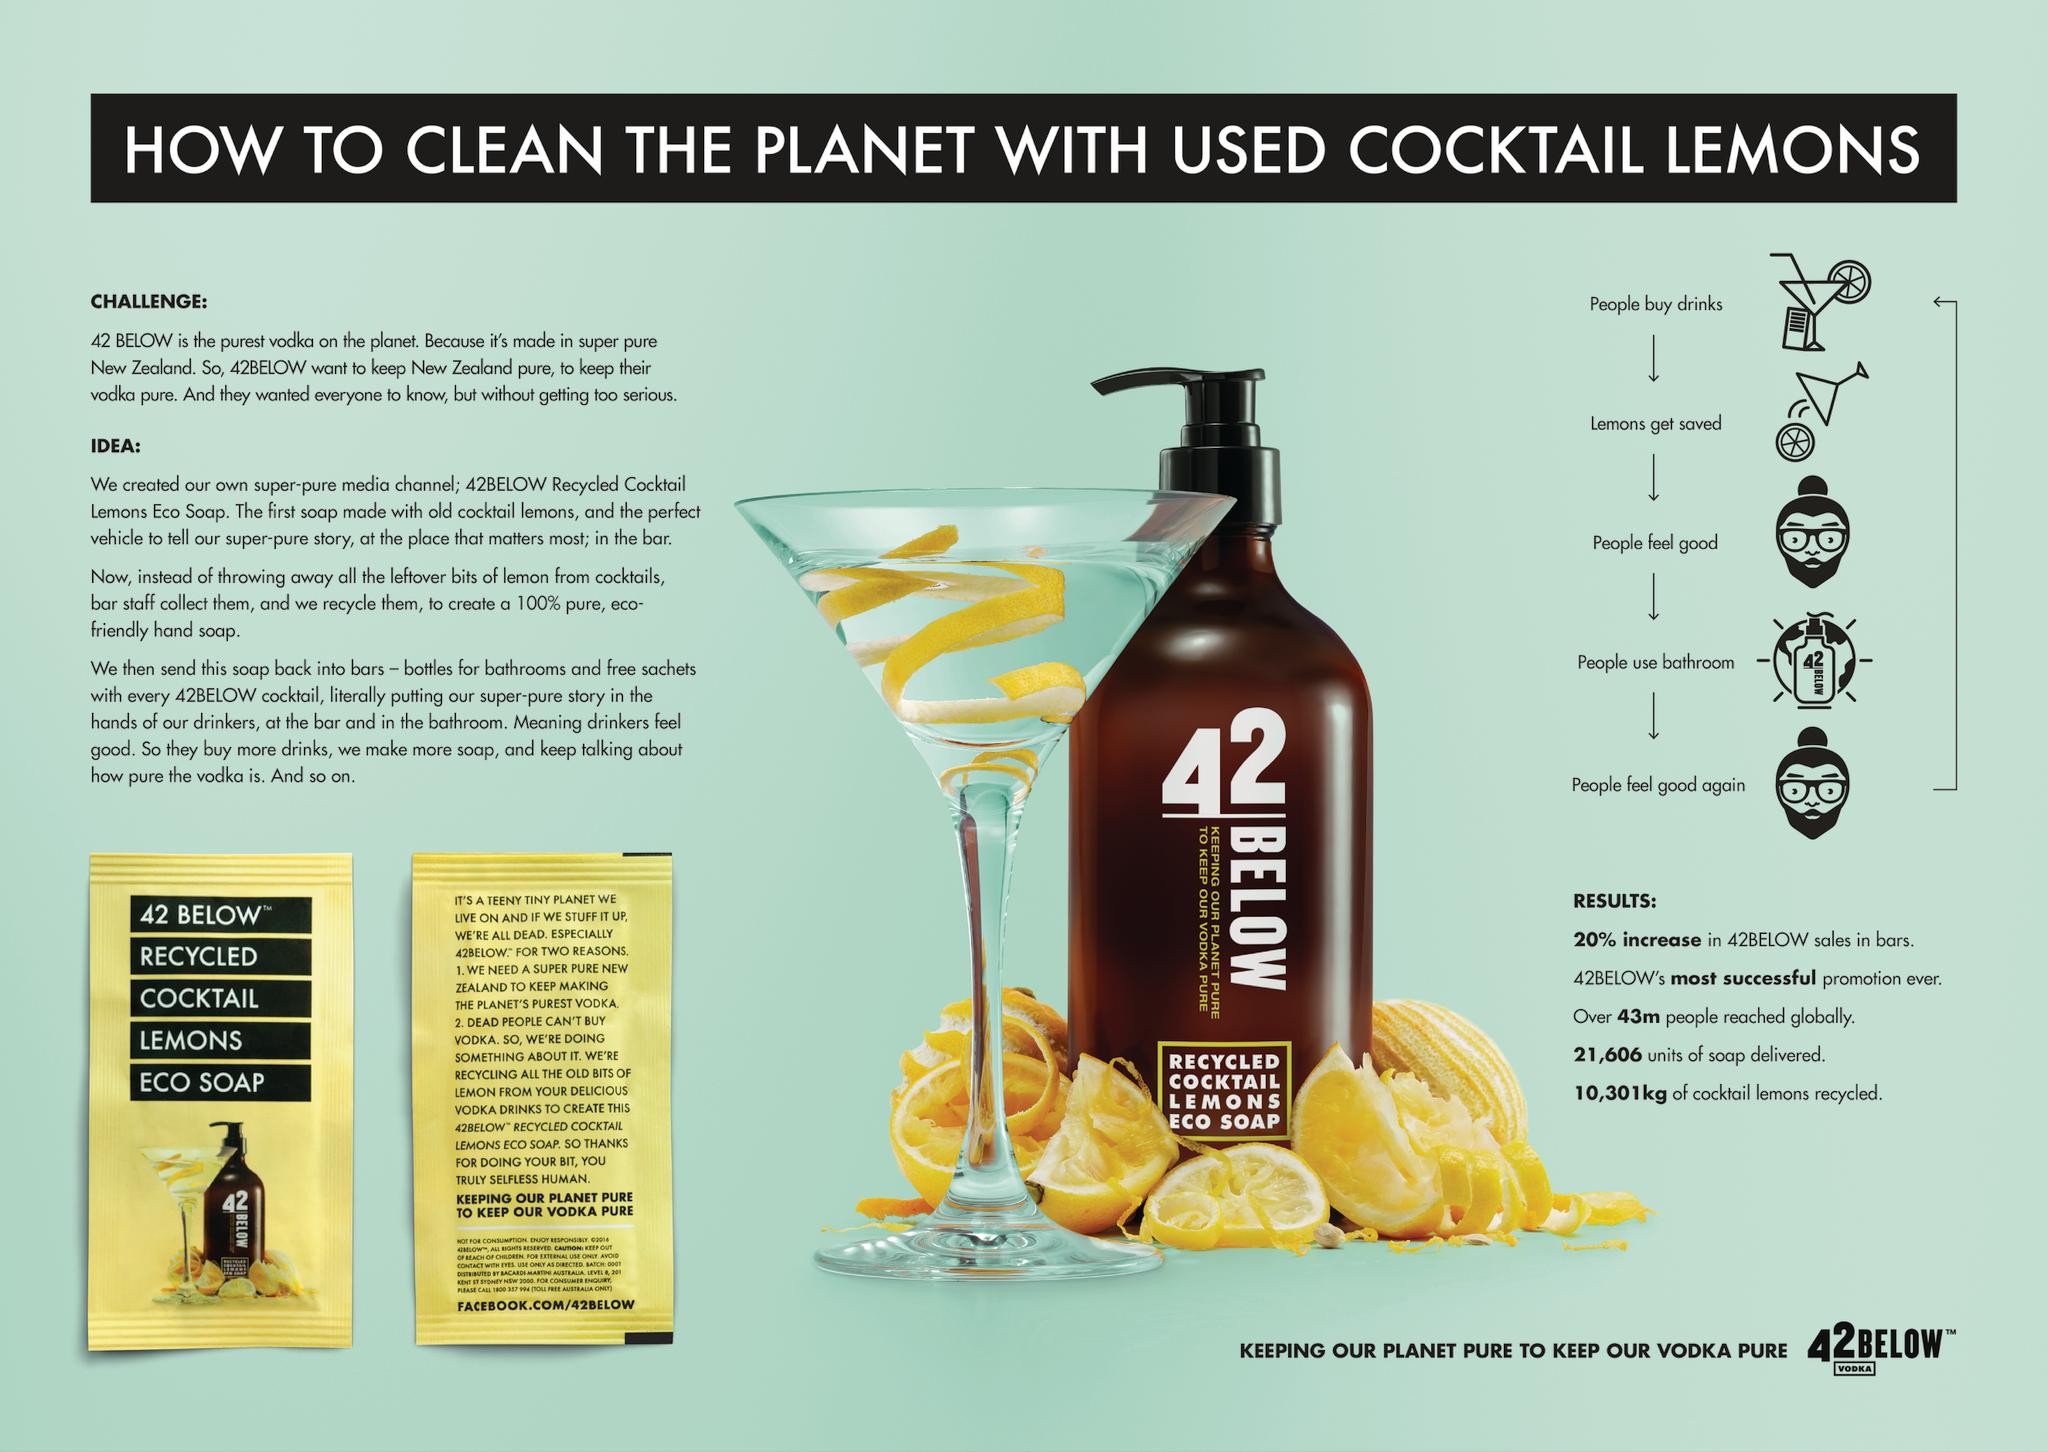 42Below Recycled Cocktail Lemons Eco Soap